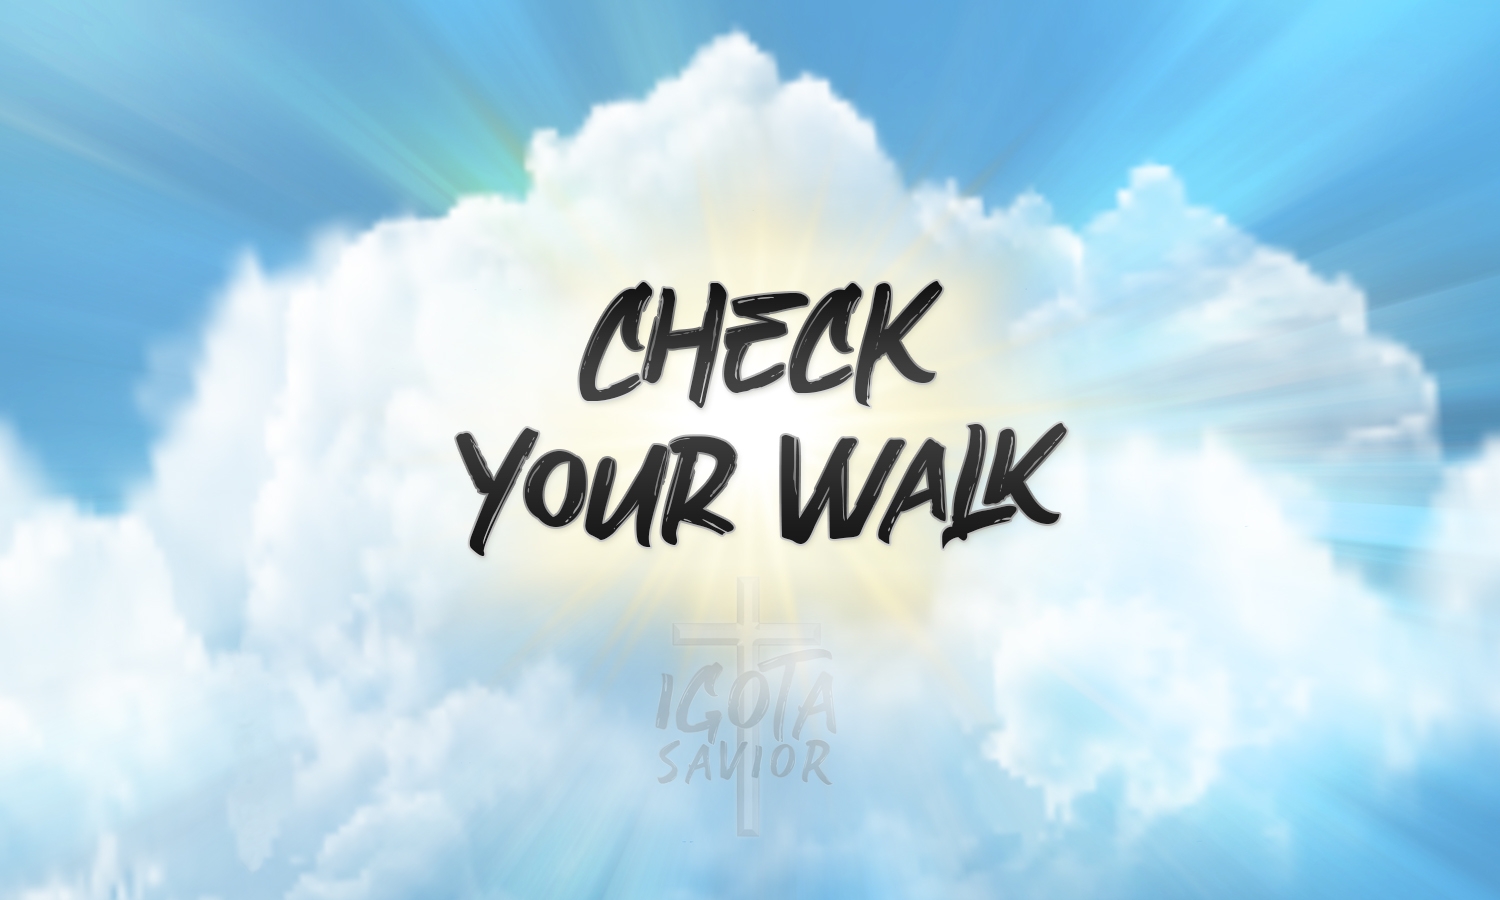 Check Your Walk